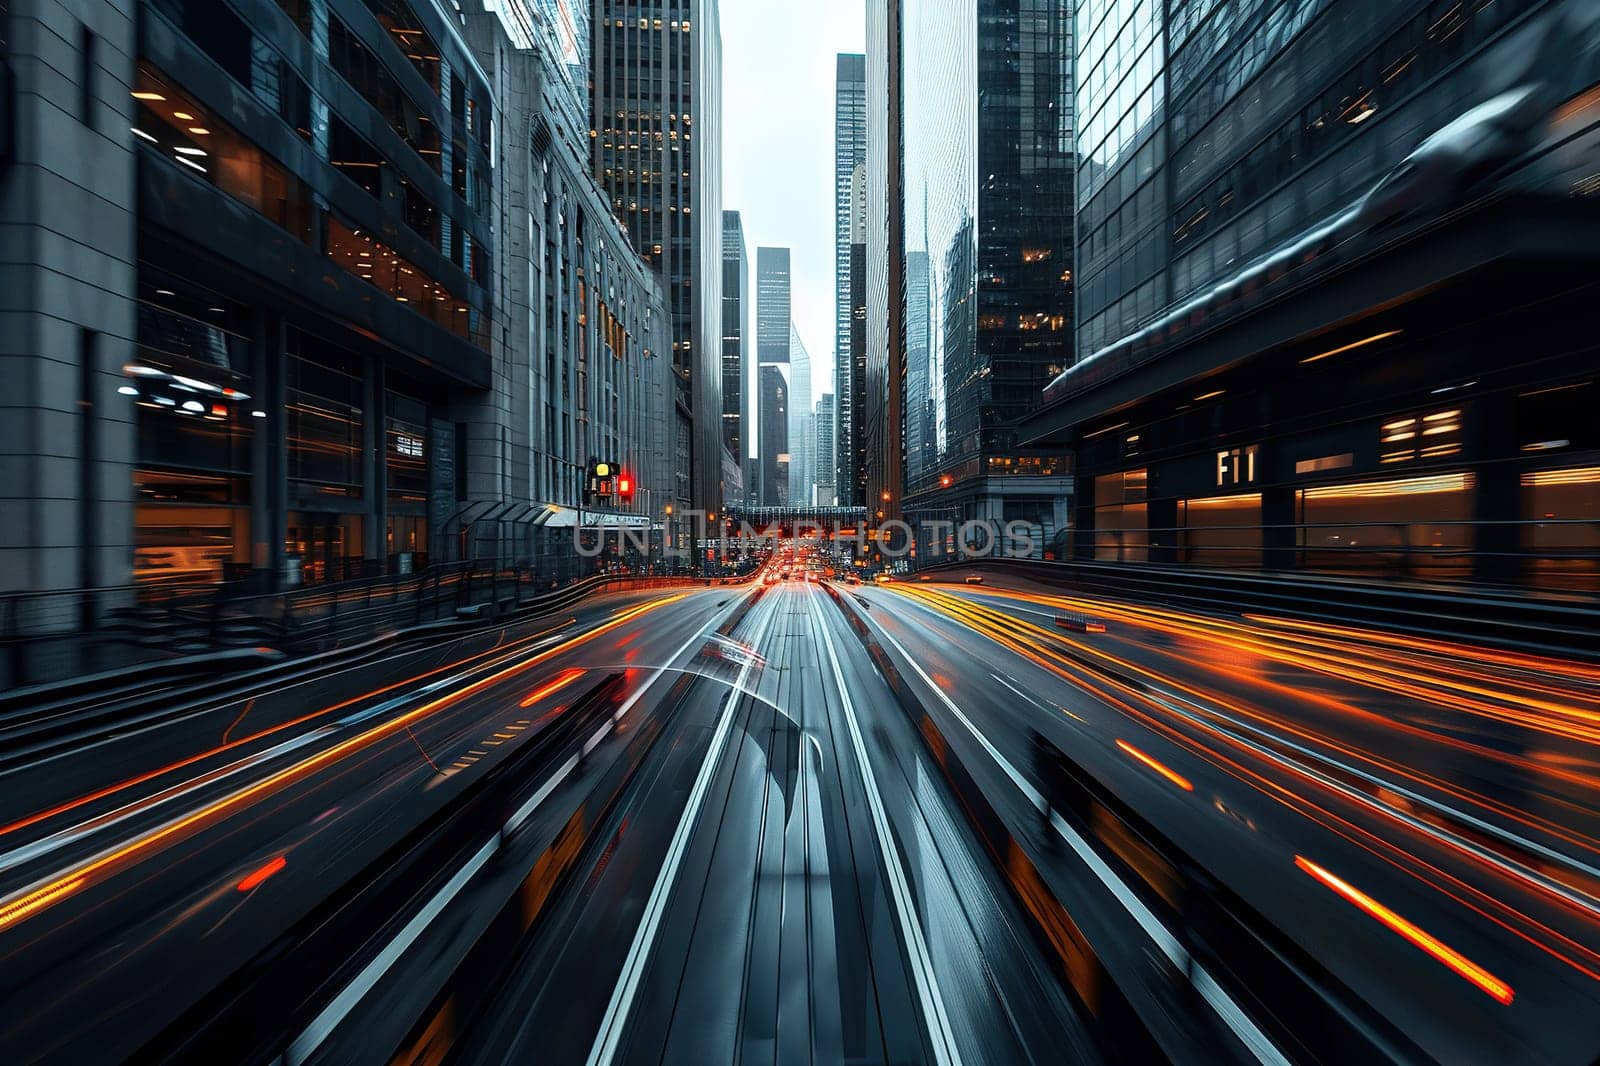 Photo in motion depicting a highway in a metropolis. Light paths against the background of skyscrapers. Generated by artificial intelligence by Vovmar